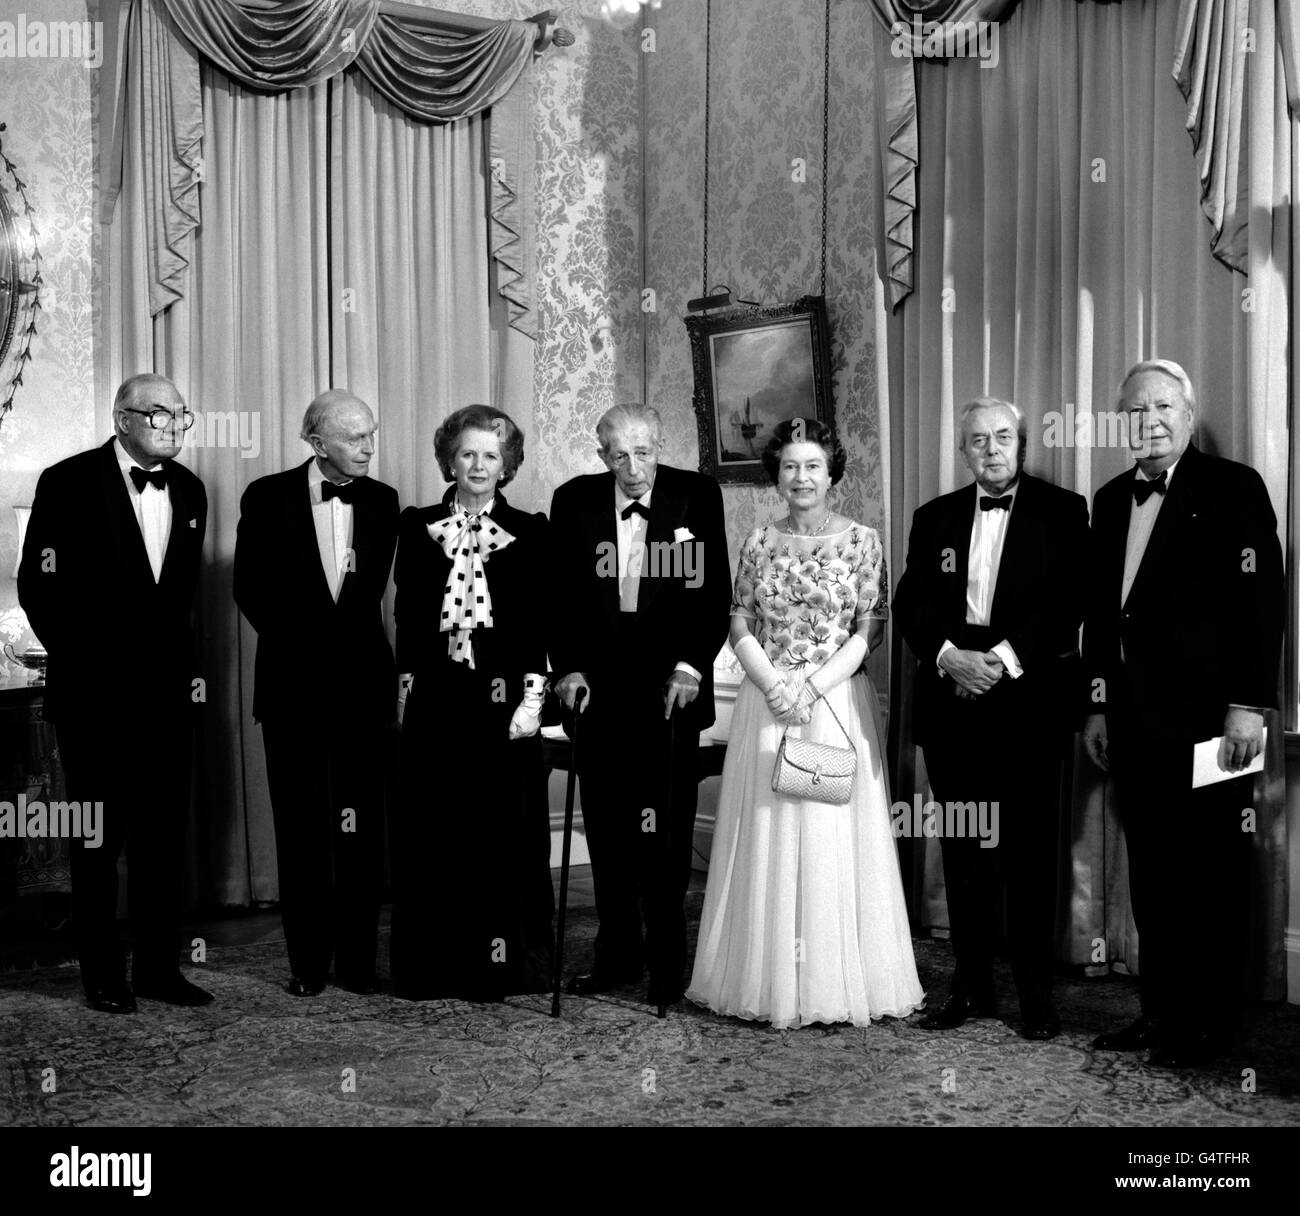 Prime Minister Margaret Thatcher is joined by Queen Elizabeth II and five former PMs at 10 Downing Street, London, as she hosts a dinner celebrating the 250th anniversary of the residence becoming the London home of Prime Ministers. (L-R) James Callaghan, Lord Home, Harold Macmillan, MargaretThatcher, Lord Stockton, the Queen, Lord Wilson and Edward Heath. Stock Photo